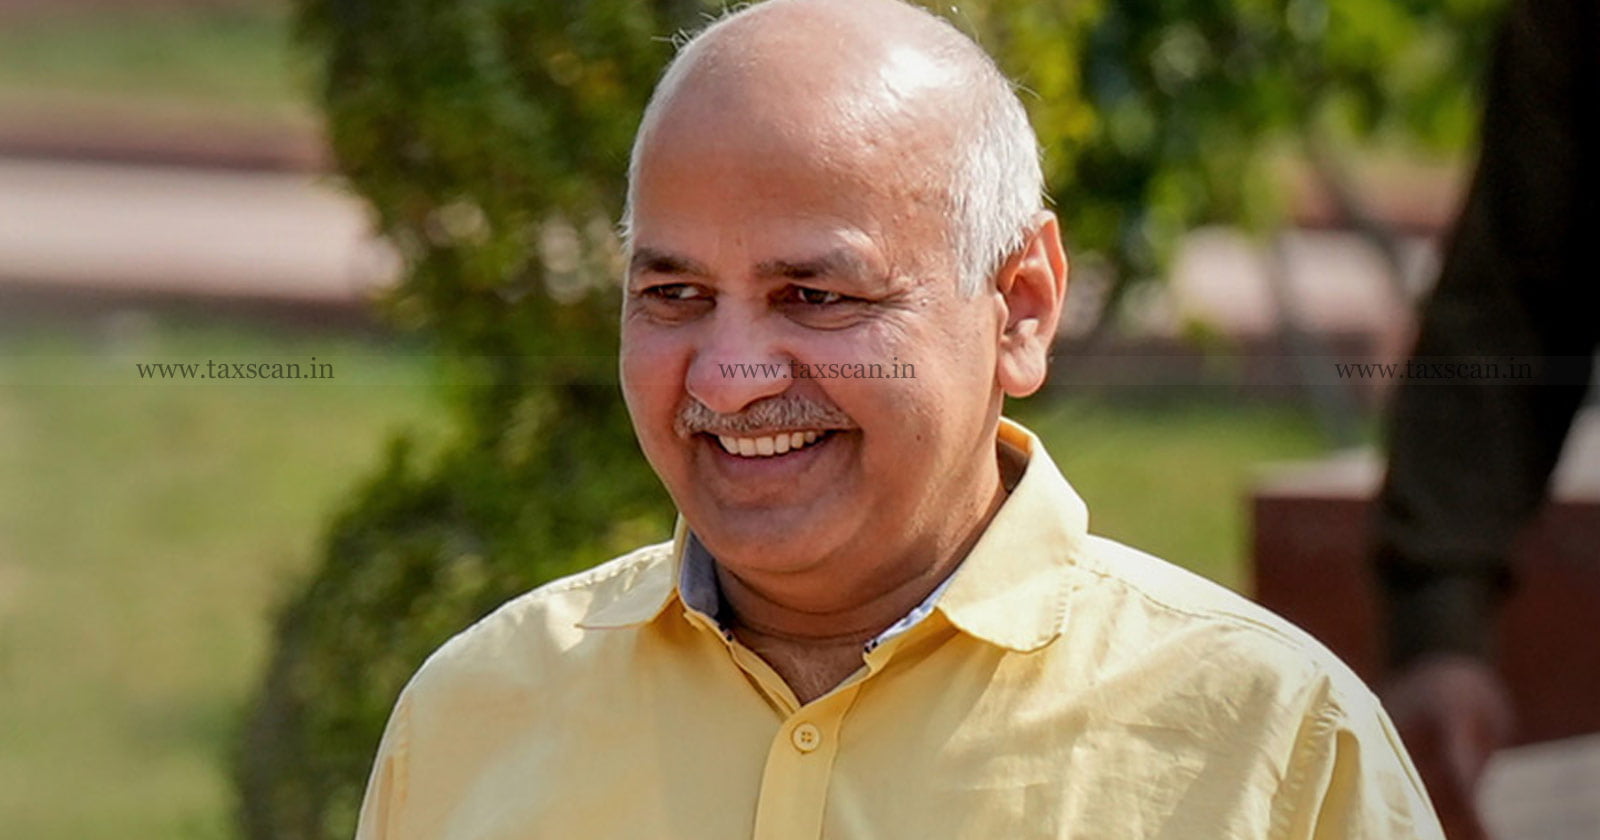 Manish Sisodia - money laundering - excise policy - Enforcement Directorate - Central Bureau of Investigation - Deputy Chief Minister - bail plea - criminal conspiracy - remand - taxscan